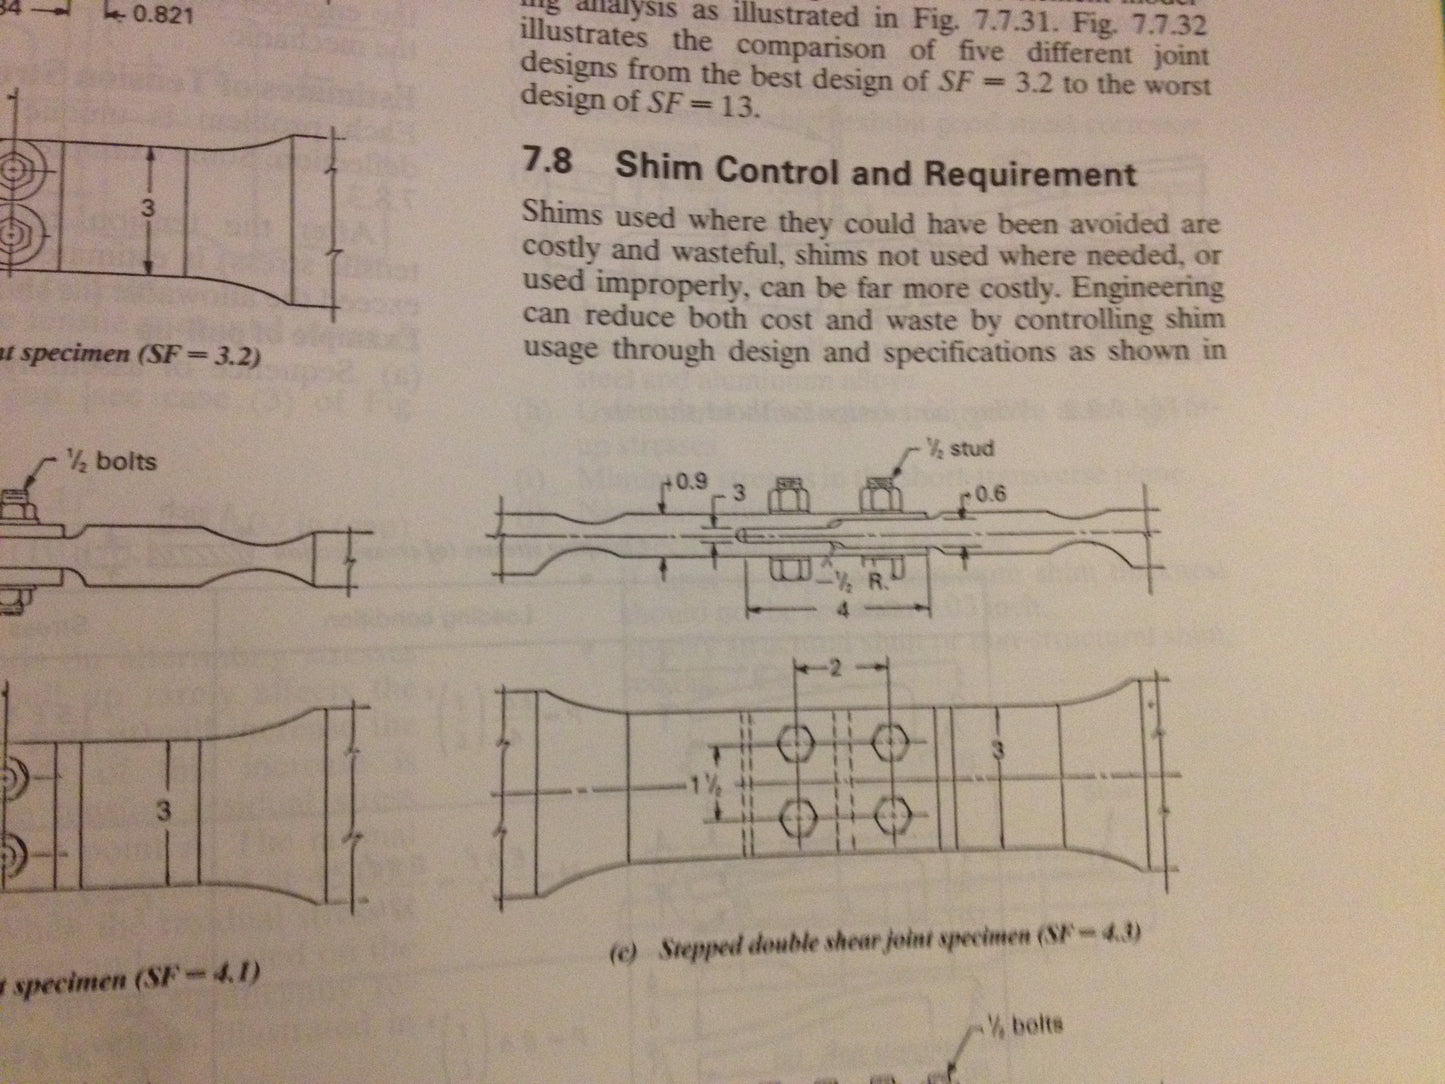 AIRFRAME STRUCTURAL DESIGN ON AIRCRAFT - MICHAEL C. Y. NIU